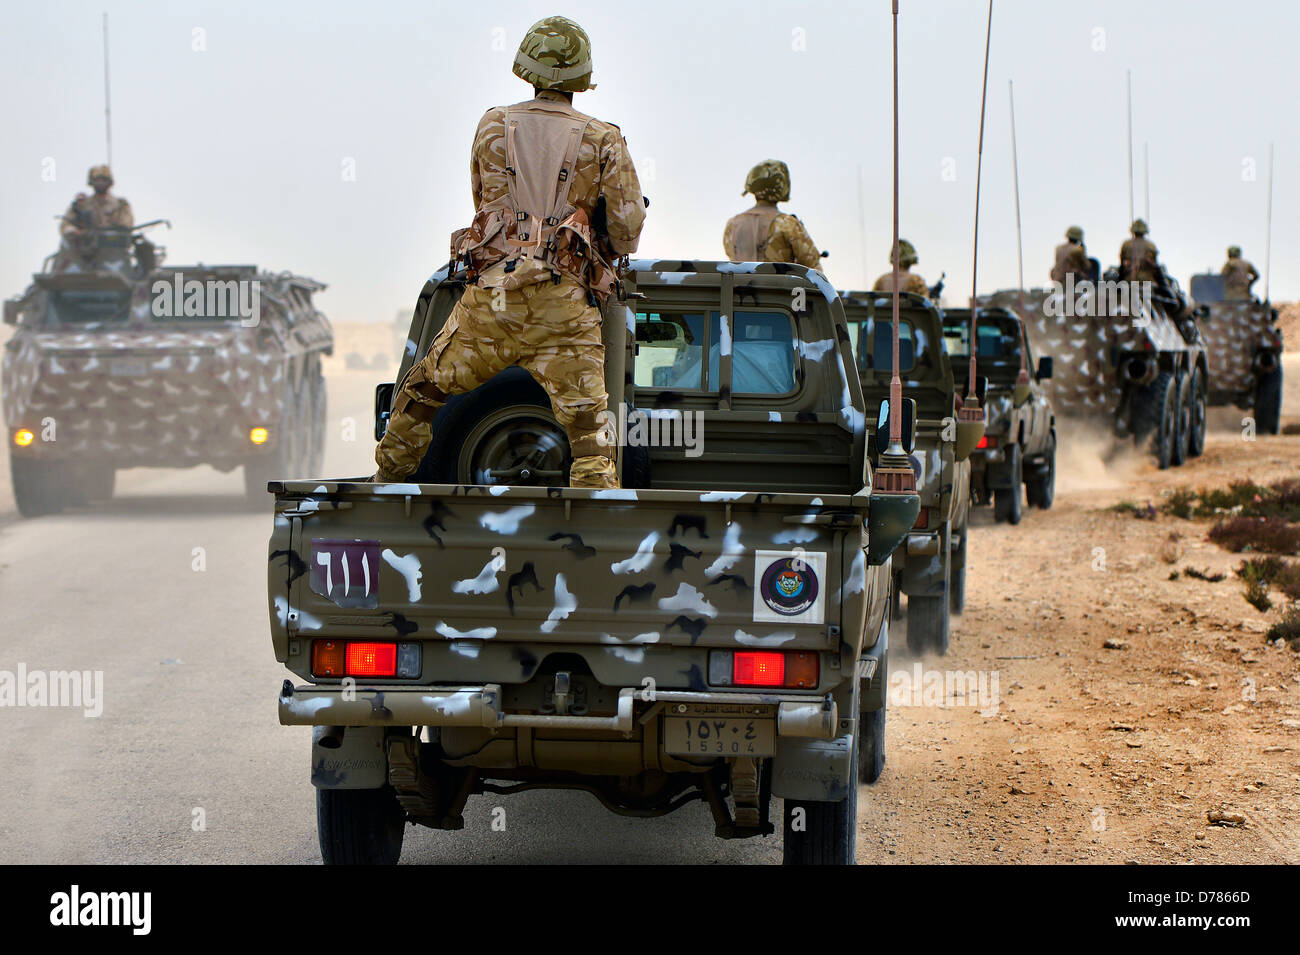 Qatar Armed Forces soldiers ride out in a convoy during a joint counter-terrorism exercise with US Forces April 28, 2013 in Zikrit, Qatar. Stock Photo